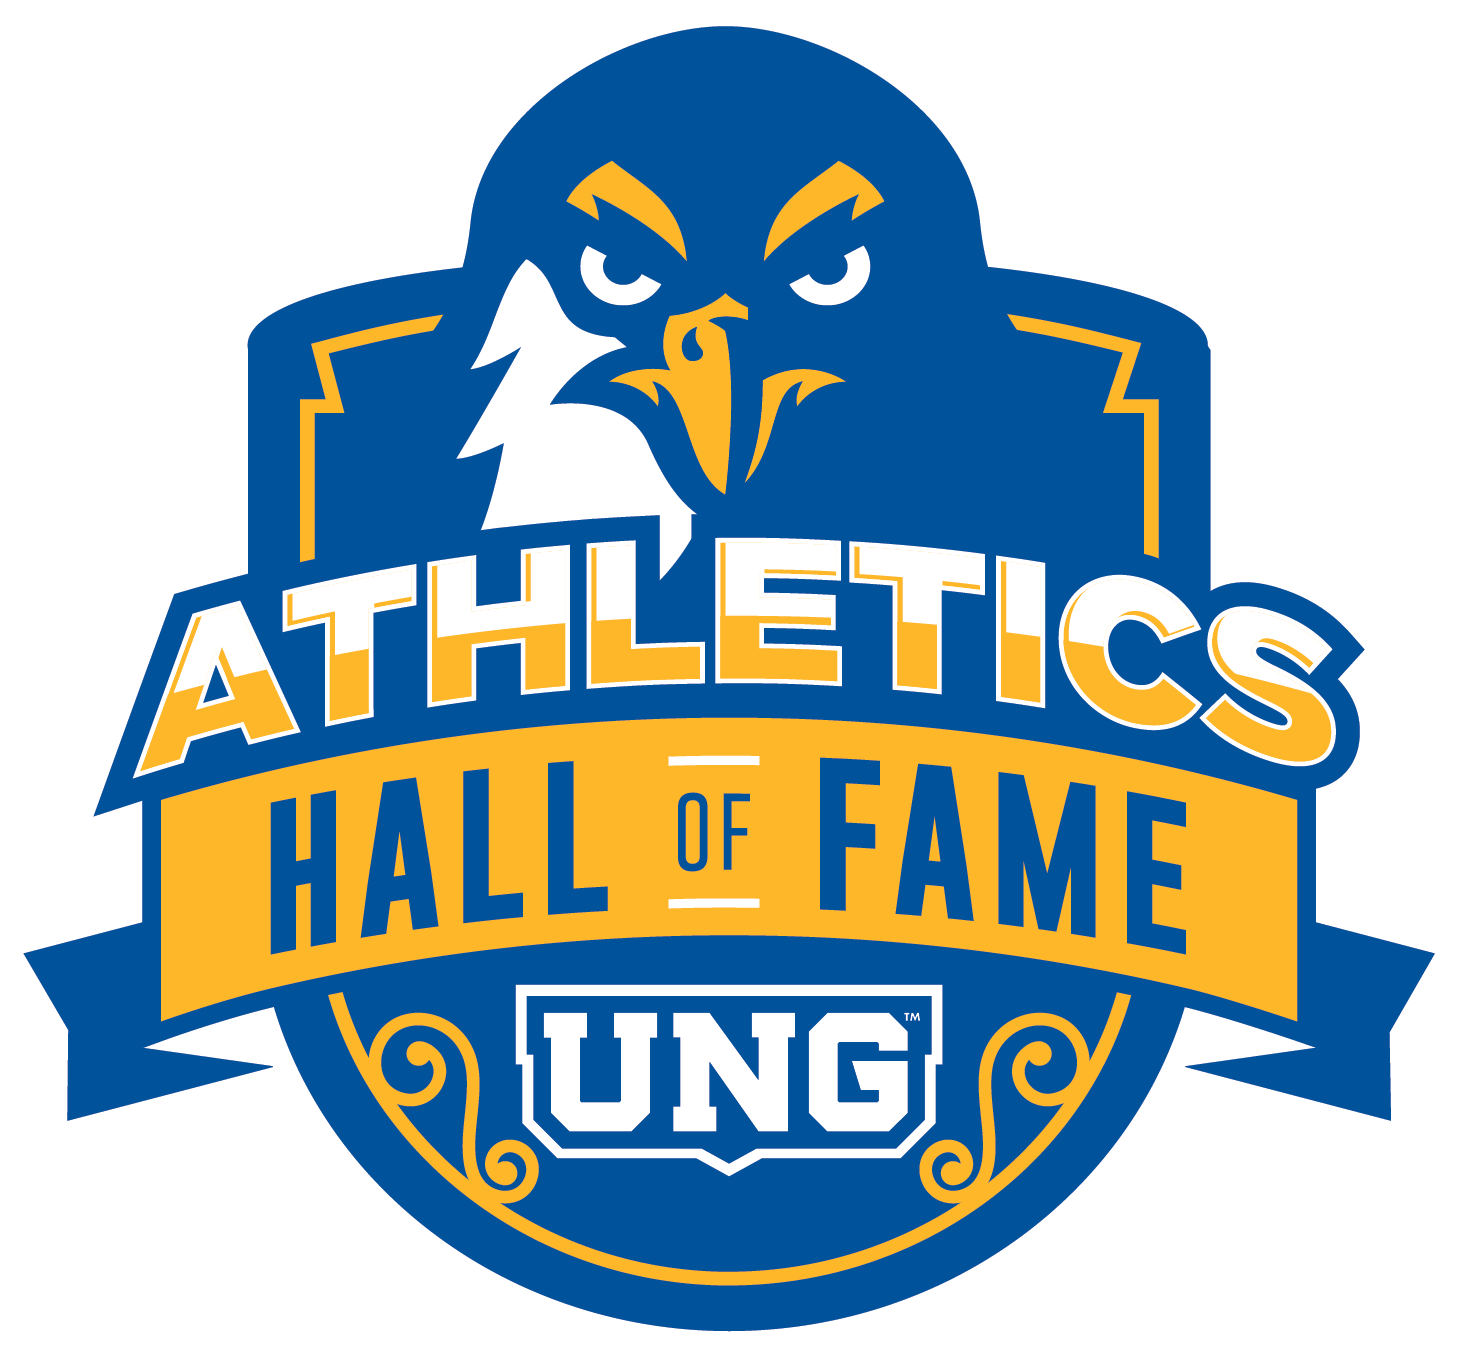 Hall Of Fame Induction Ceremony Will Precede A Peach - University Of North Georgia (1458x1352)